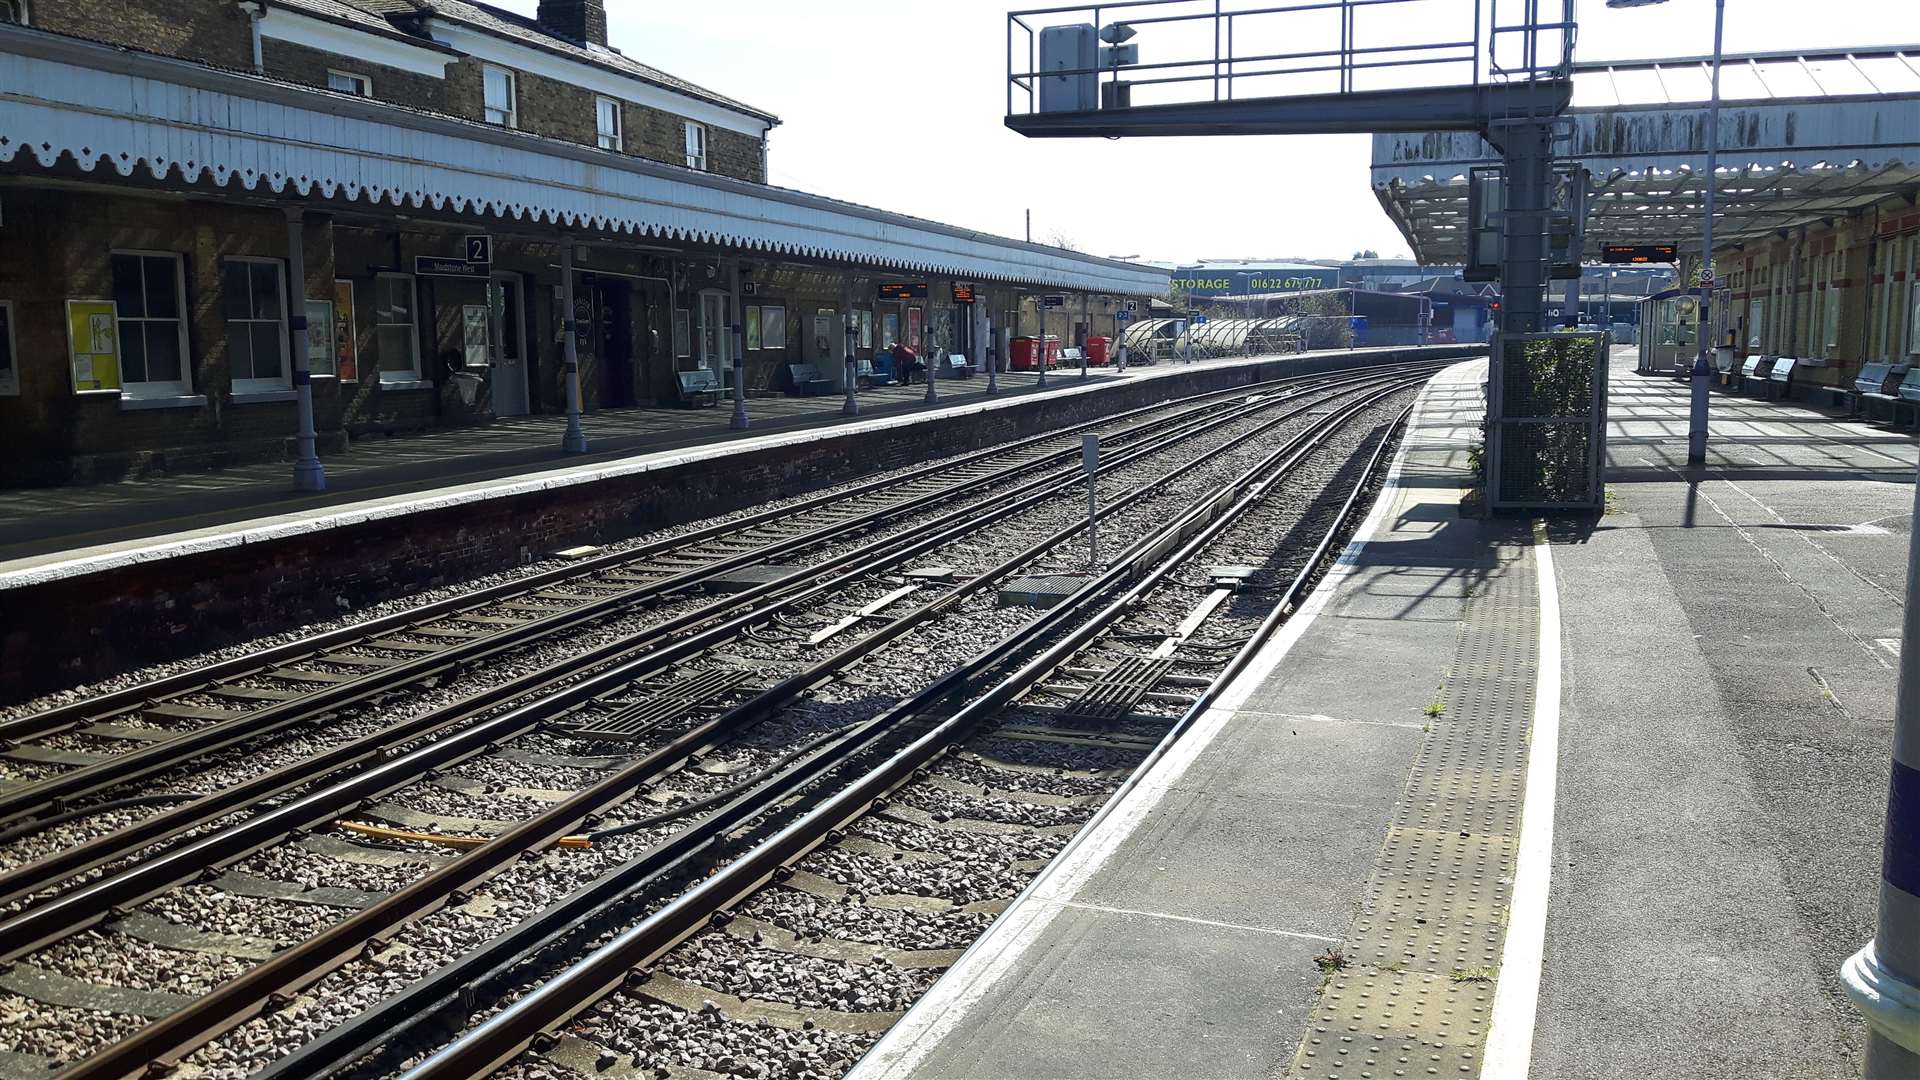 Maidstone West Station during lockdown in March 2020